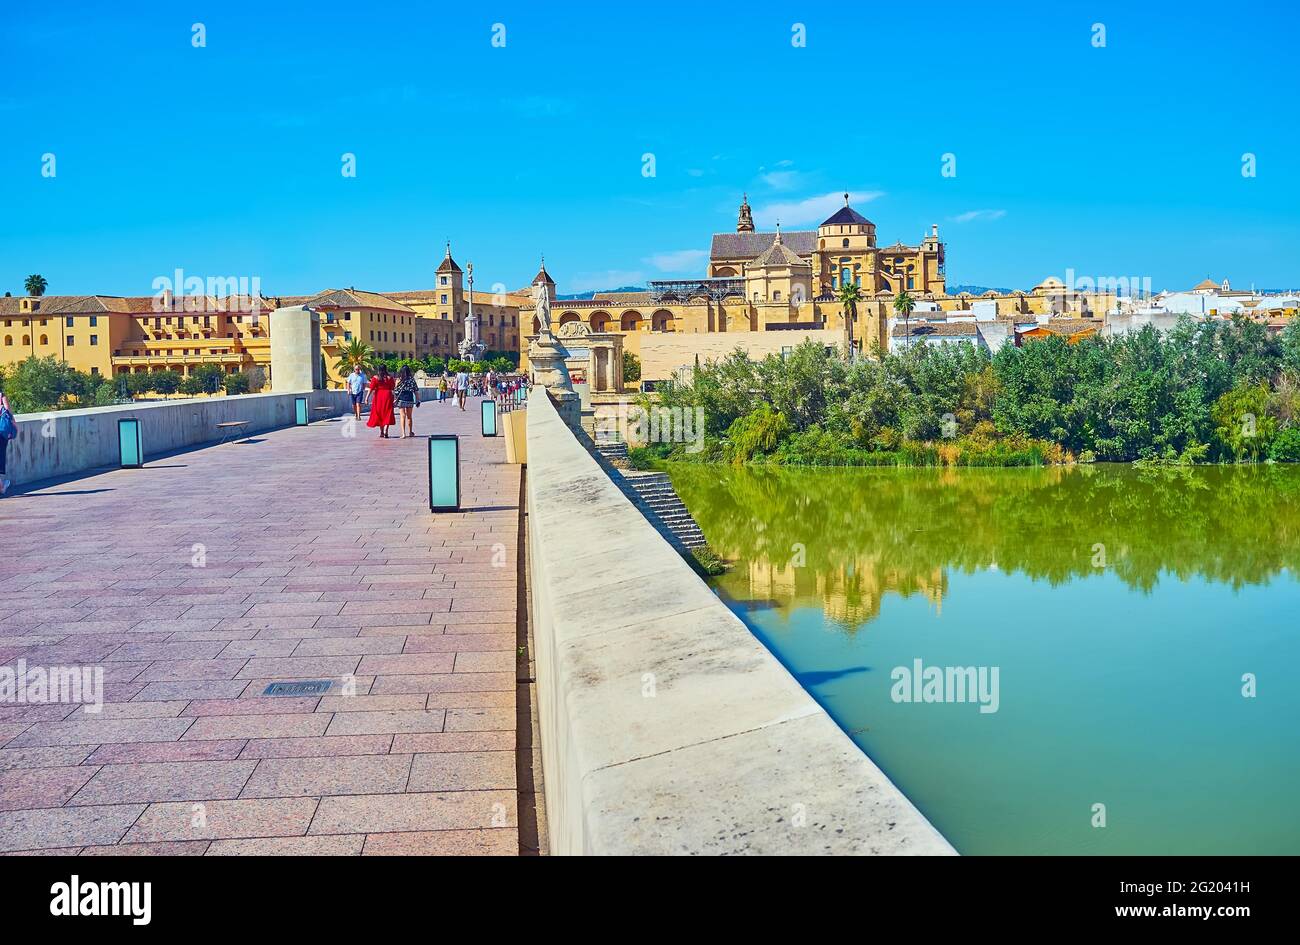 Walk the ancient stone Roman Bridge (Puente Romano), watch the riverside city views and medieval Mosque-Cathedral (Mezquita), Cordoba, Spain Stock Photo